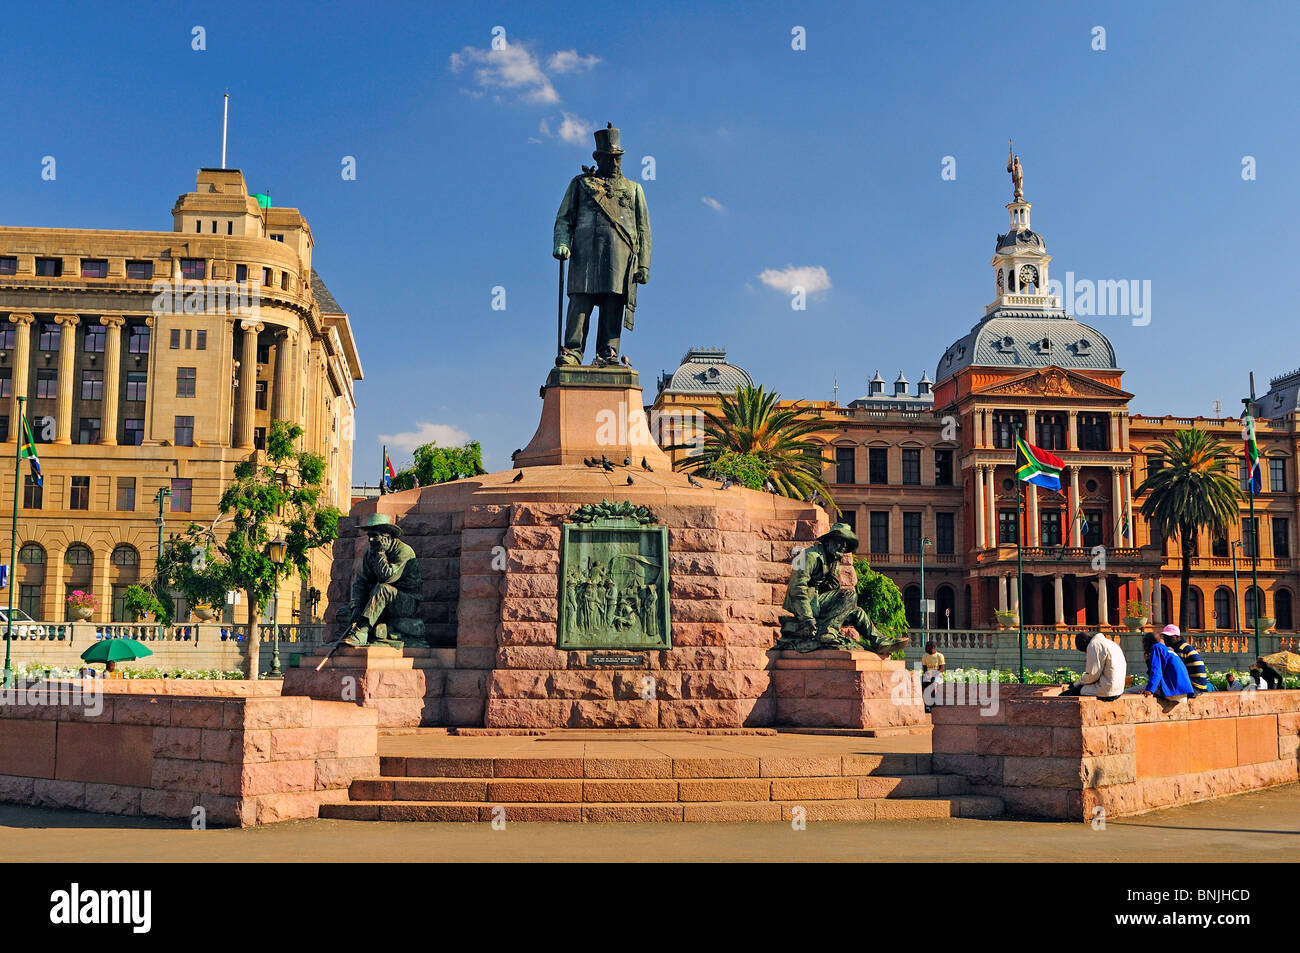 Palace of Justice Church Square Pretoria city Gauteng South Africa Paul Kruger statue memorial people square Stock Photo